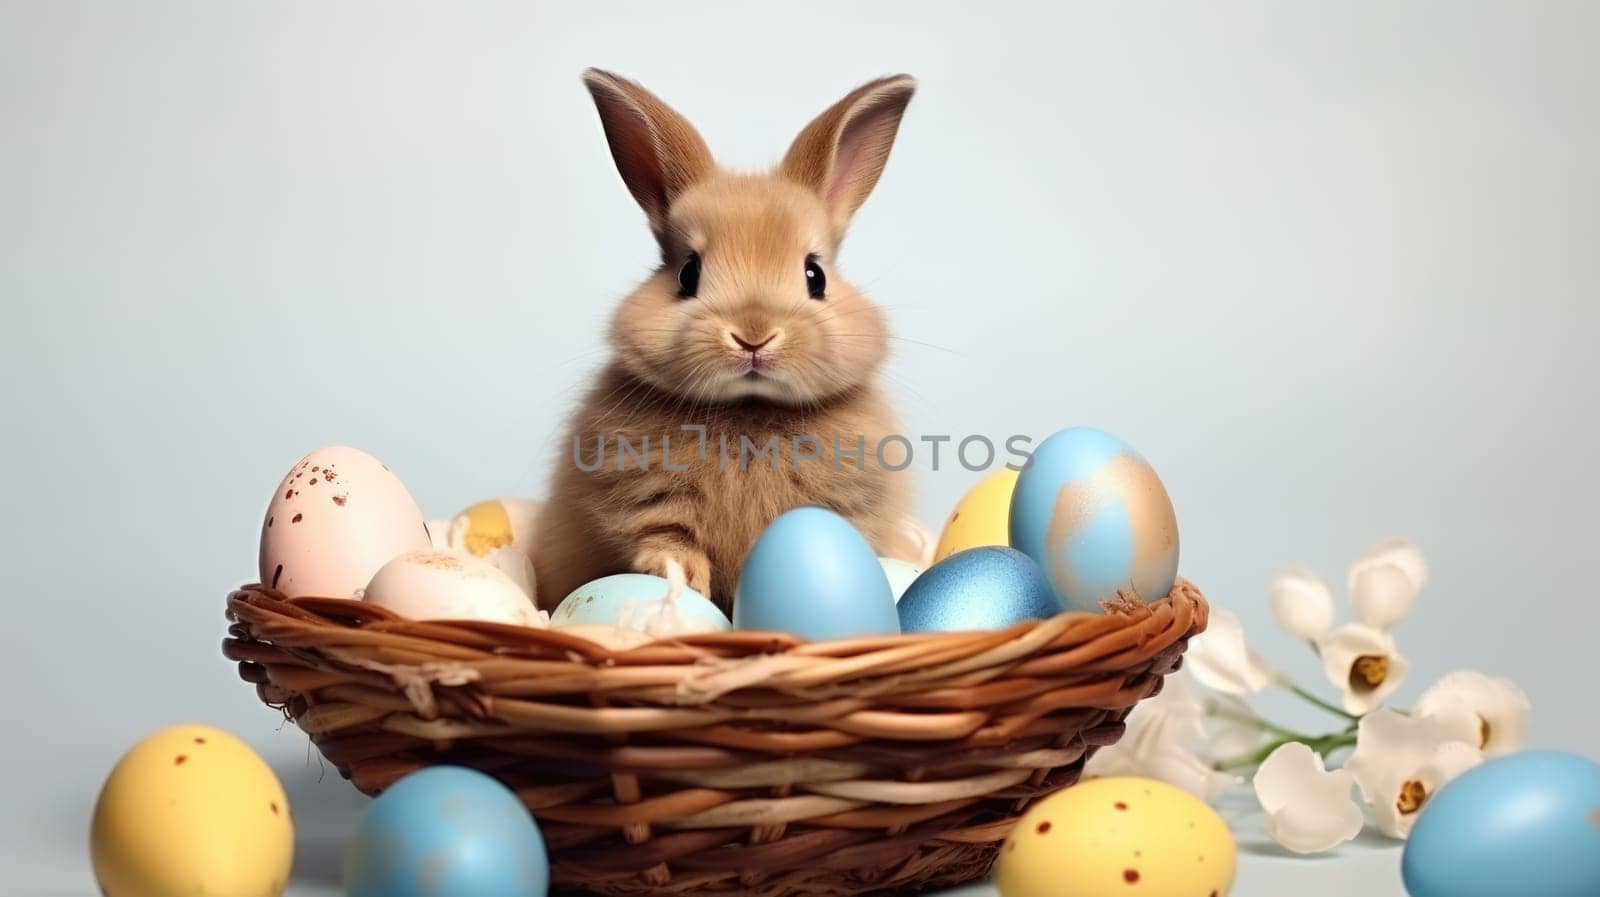 Cute fluffy rabbit in a basket full of colorful Easter eggs on a blue background by JuliaDorian